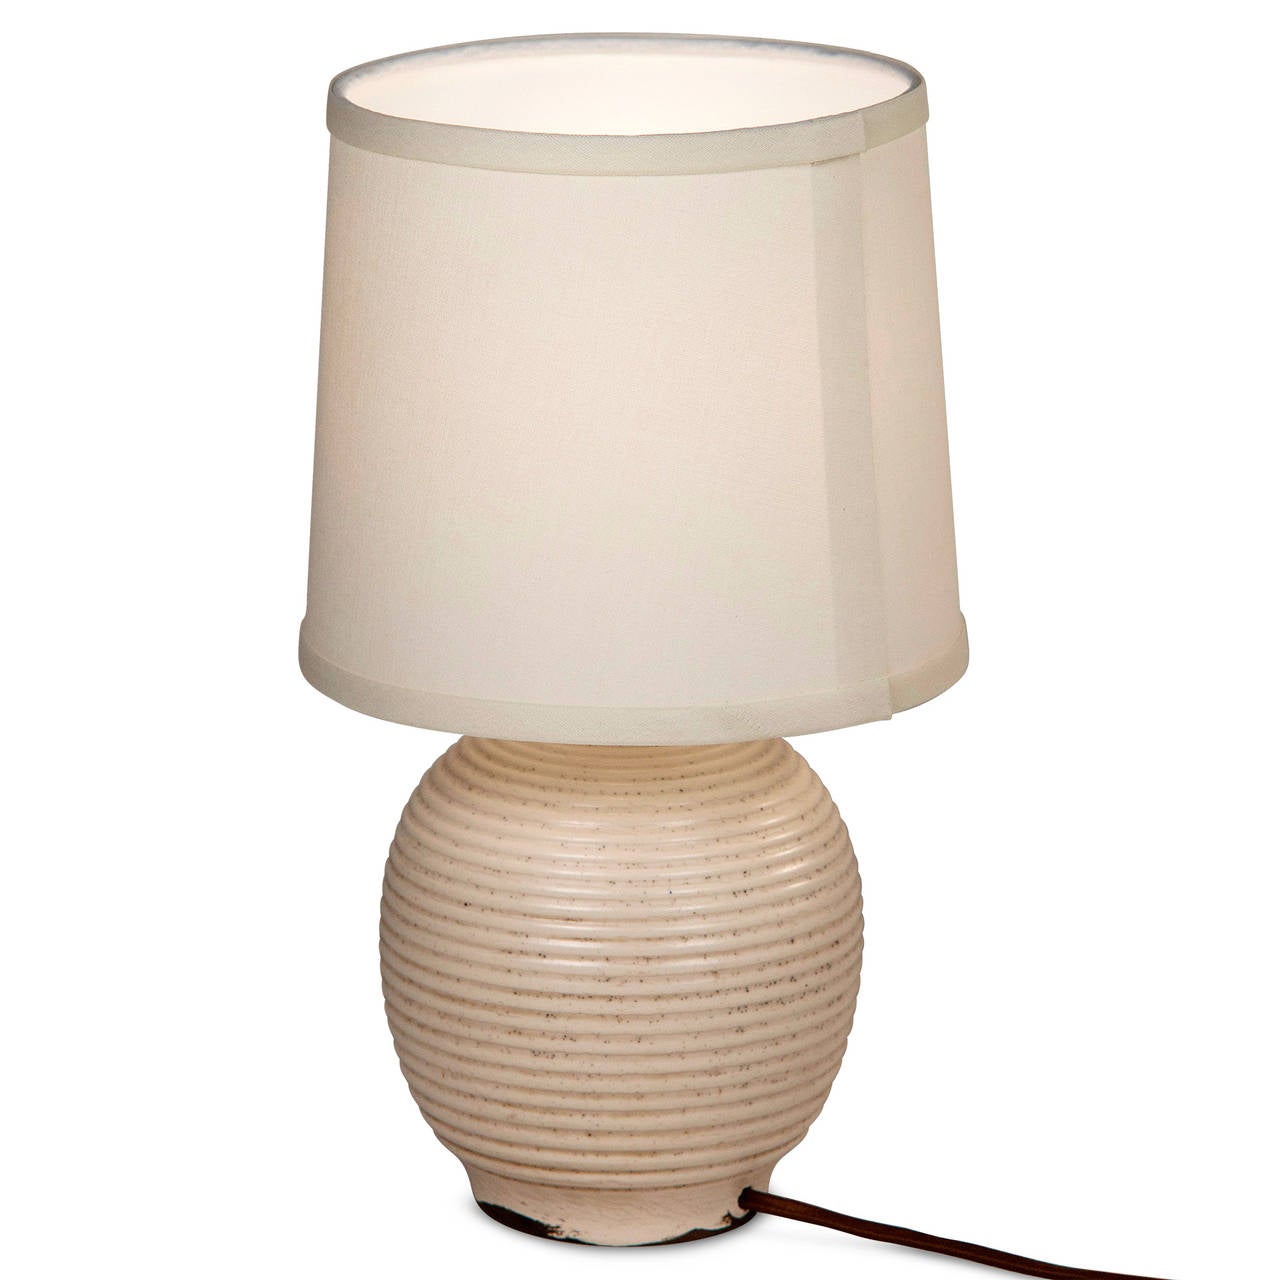 Glazed bulbous form ceramic table lamp, with circular grooves around the body, in custom silk shade, in pale off-white glaze, by Keramos for Sevres, French 1950s. Signed to underside. In custom silk shade. Overall height 14 in, diameter of base 6